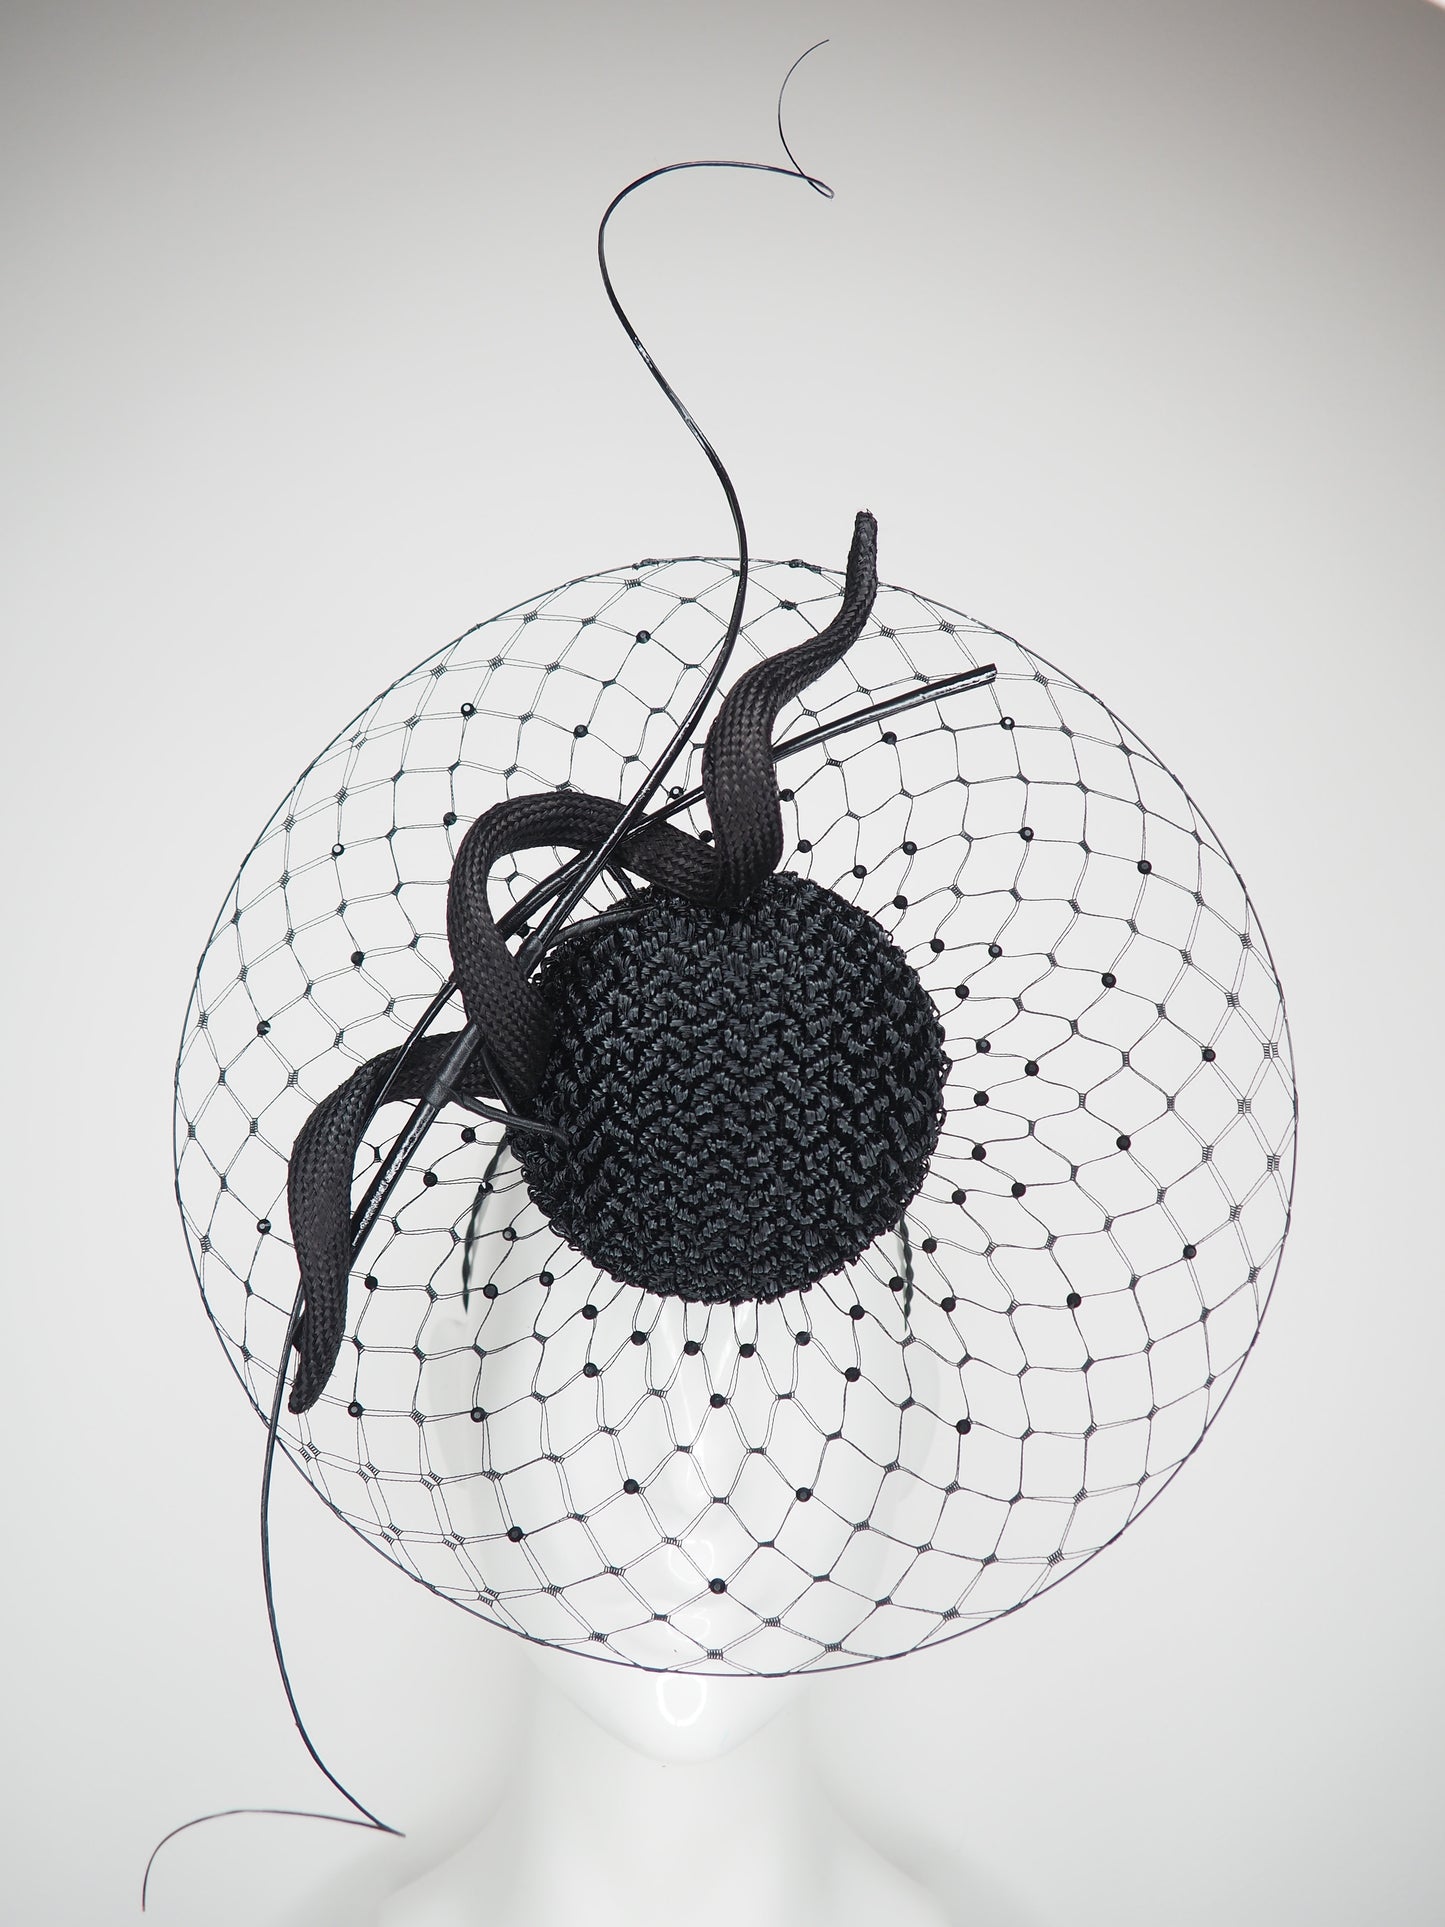 Sparkles at Night -   Black vintage straw and leather veiled percher with black veil and crystal detail